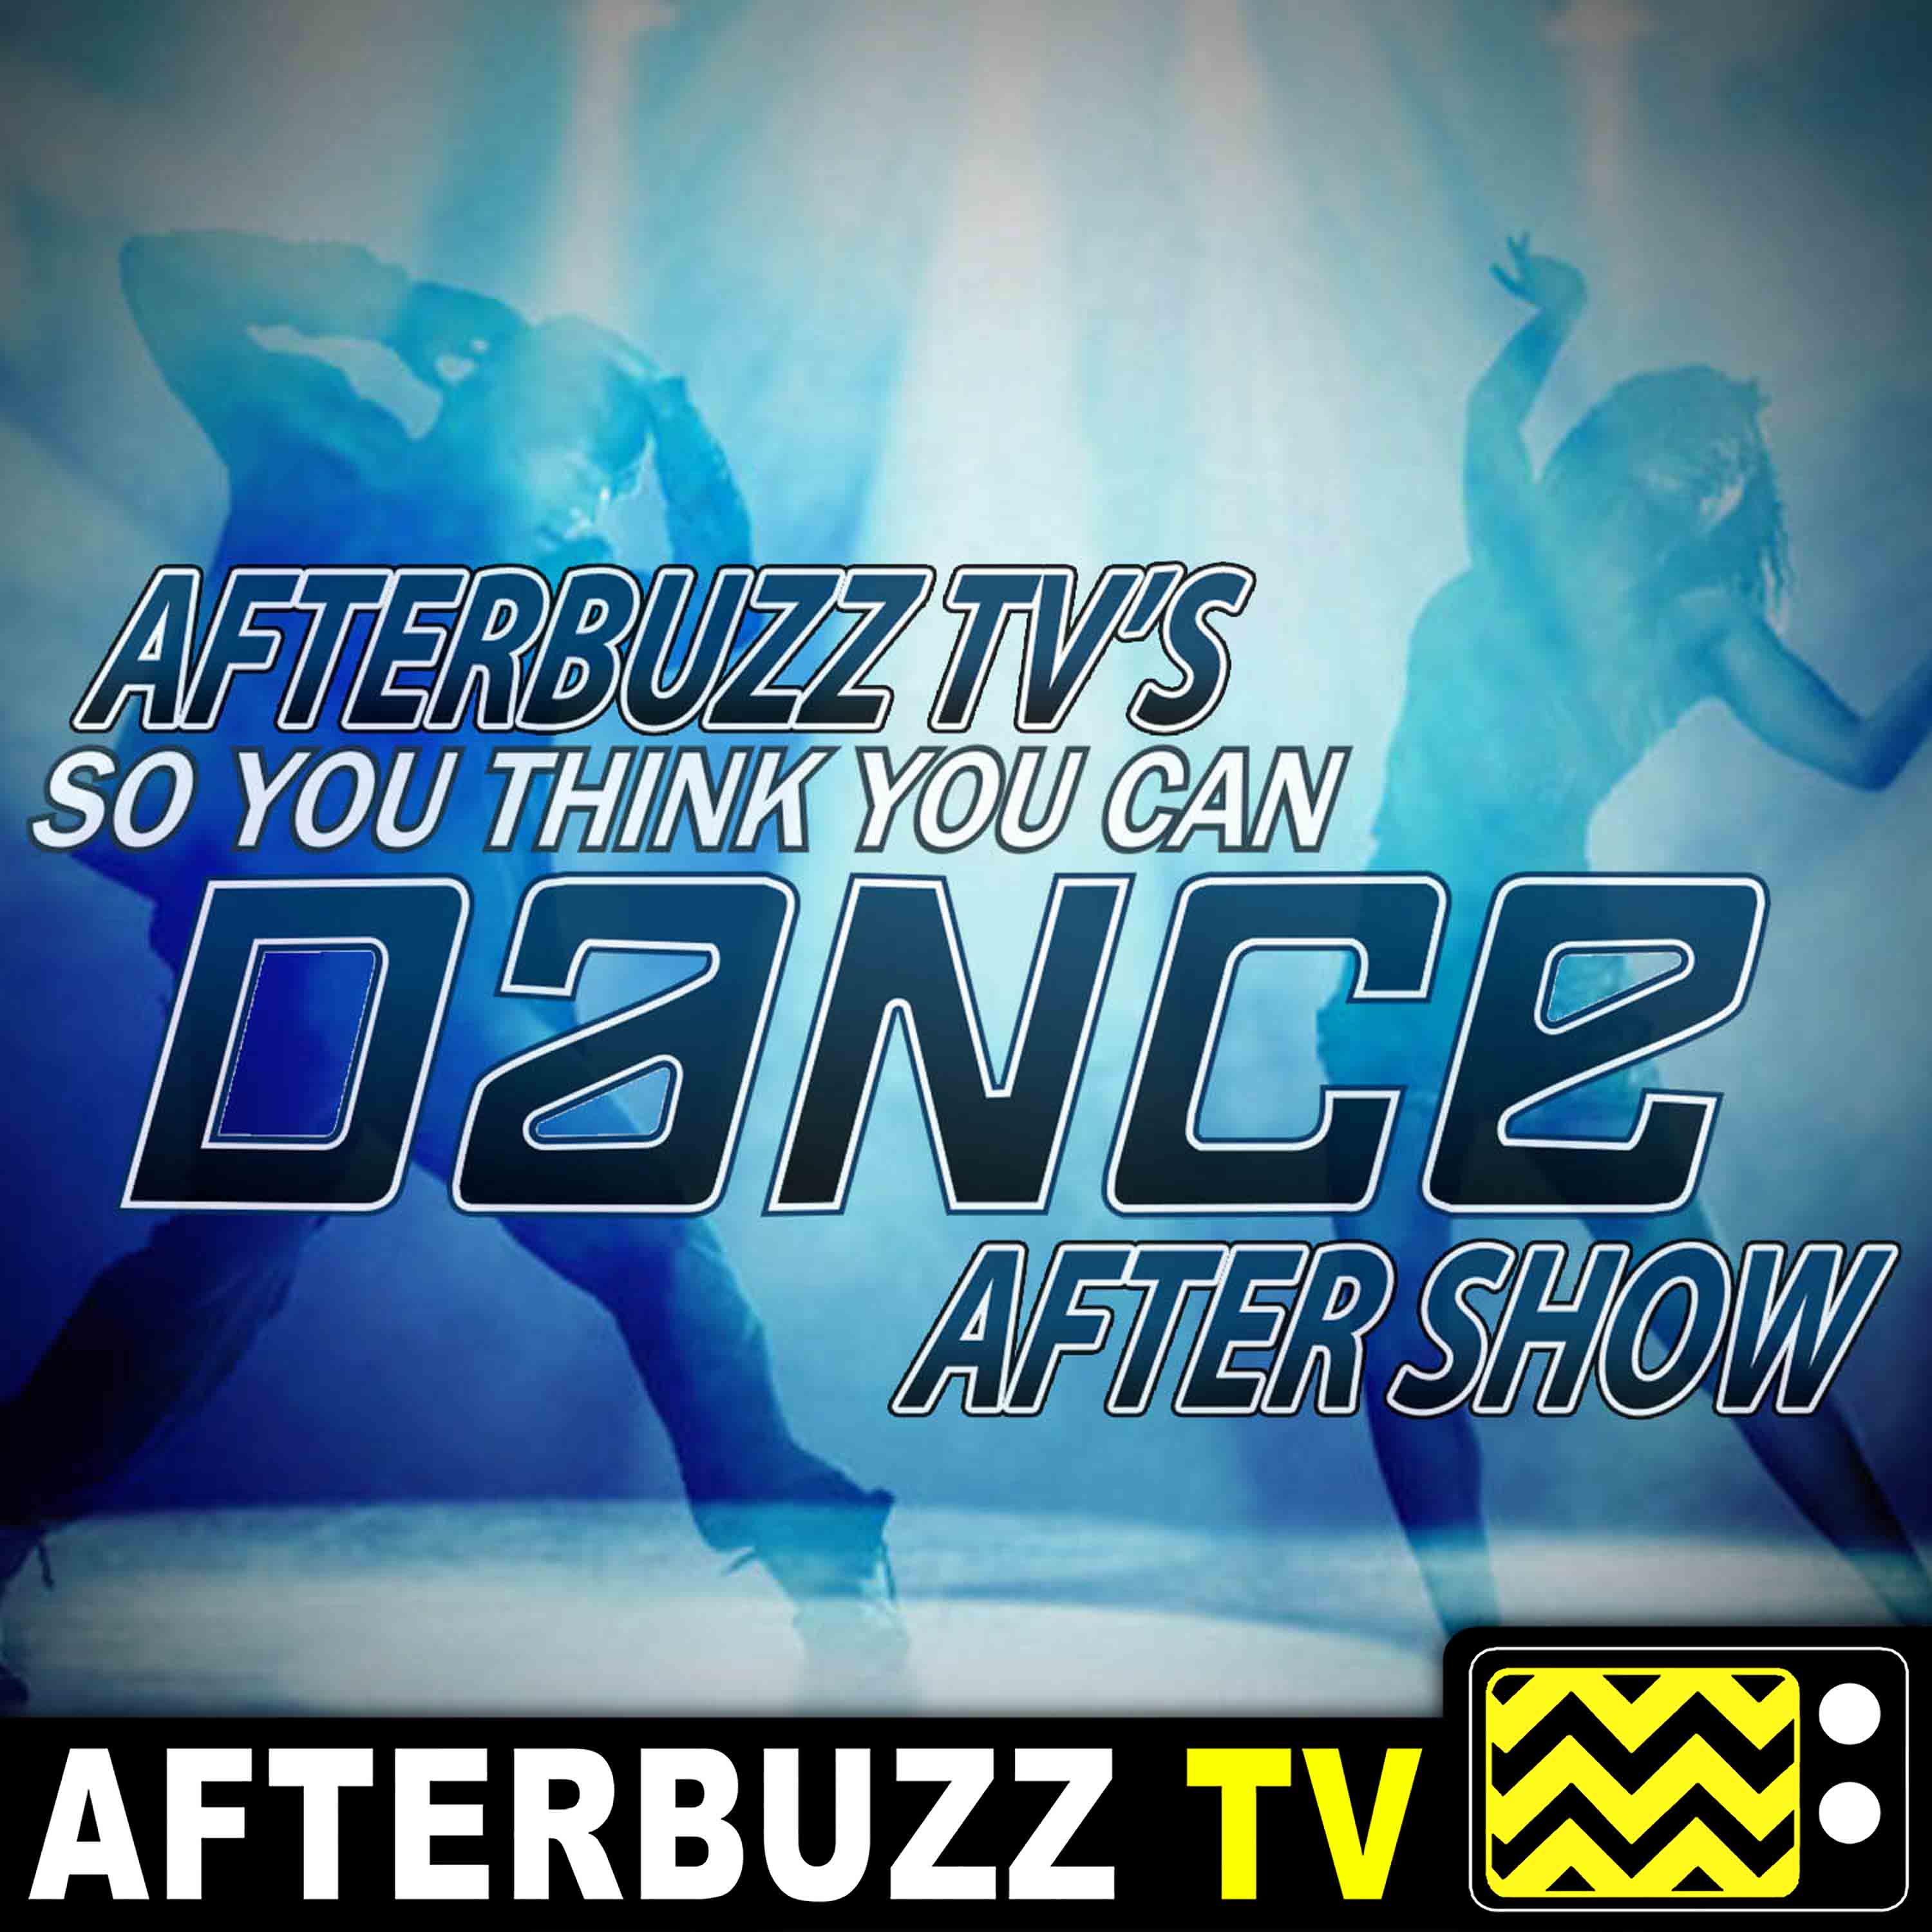 So You Think You Can Dance S:15 | Top Ten Men E:8 | AfterBuzz TV AfterShow